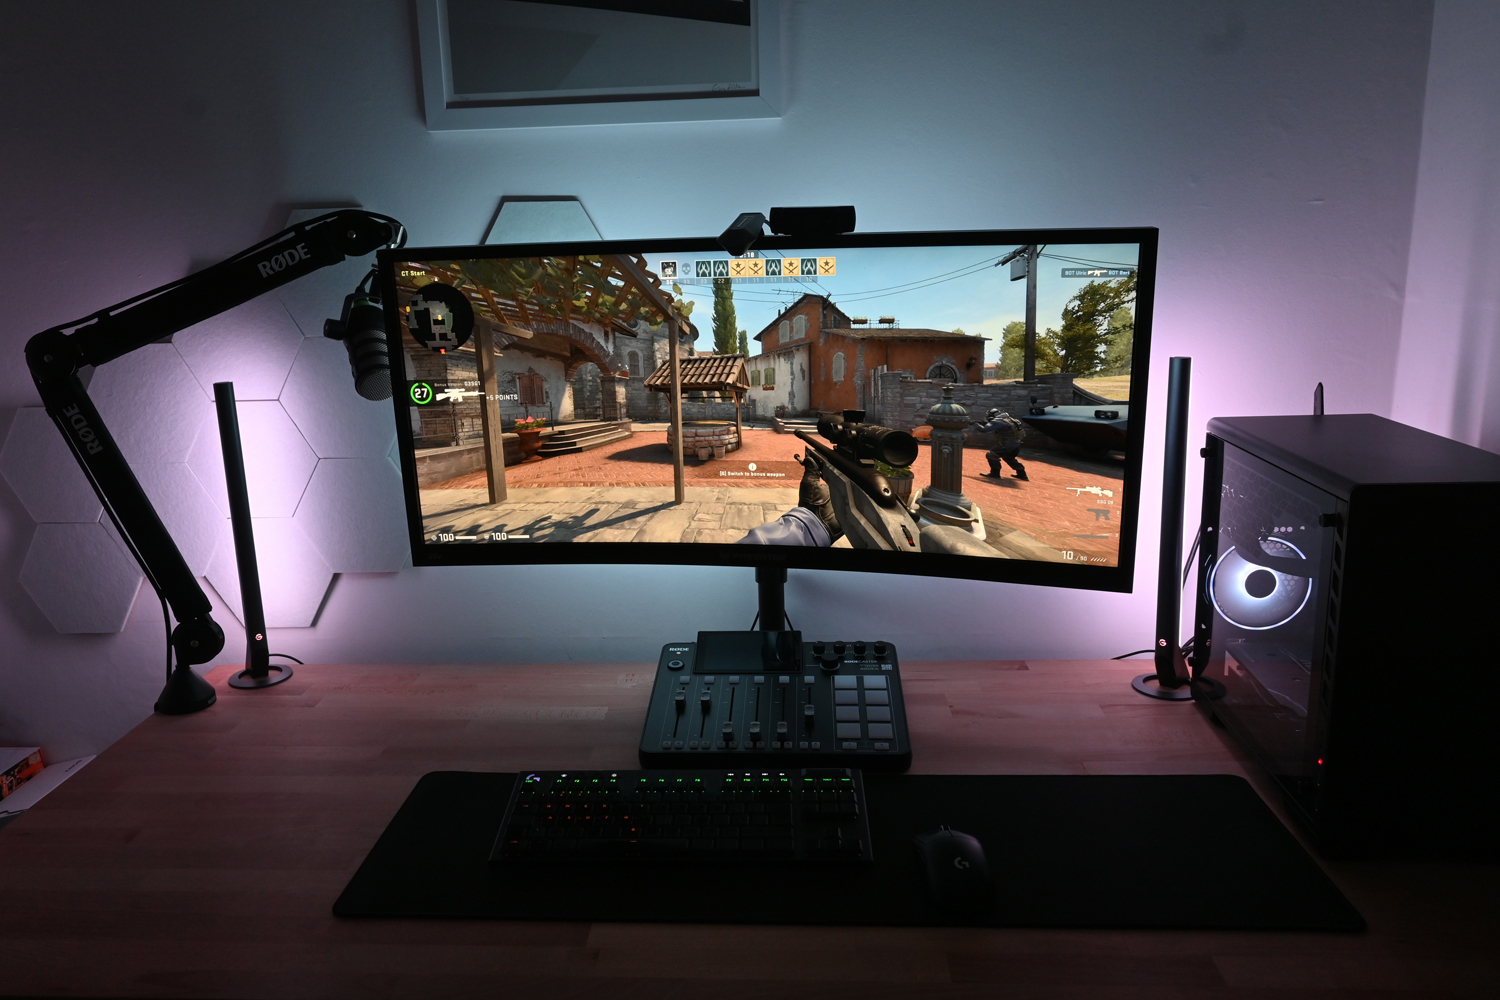 Govee Dreamview G1 Pro gaming light review: sets the mood